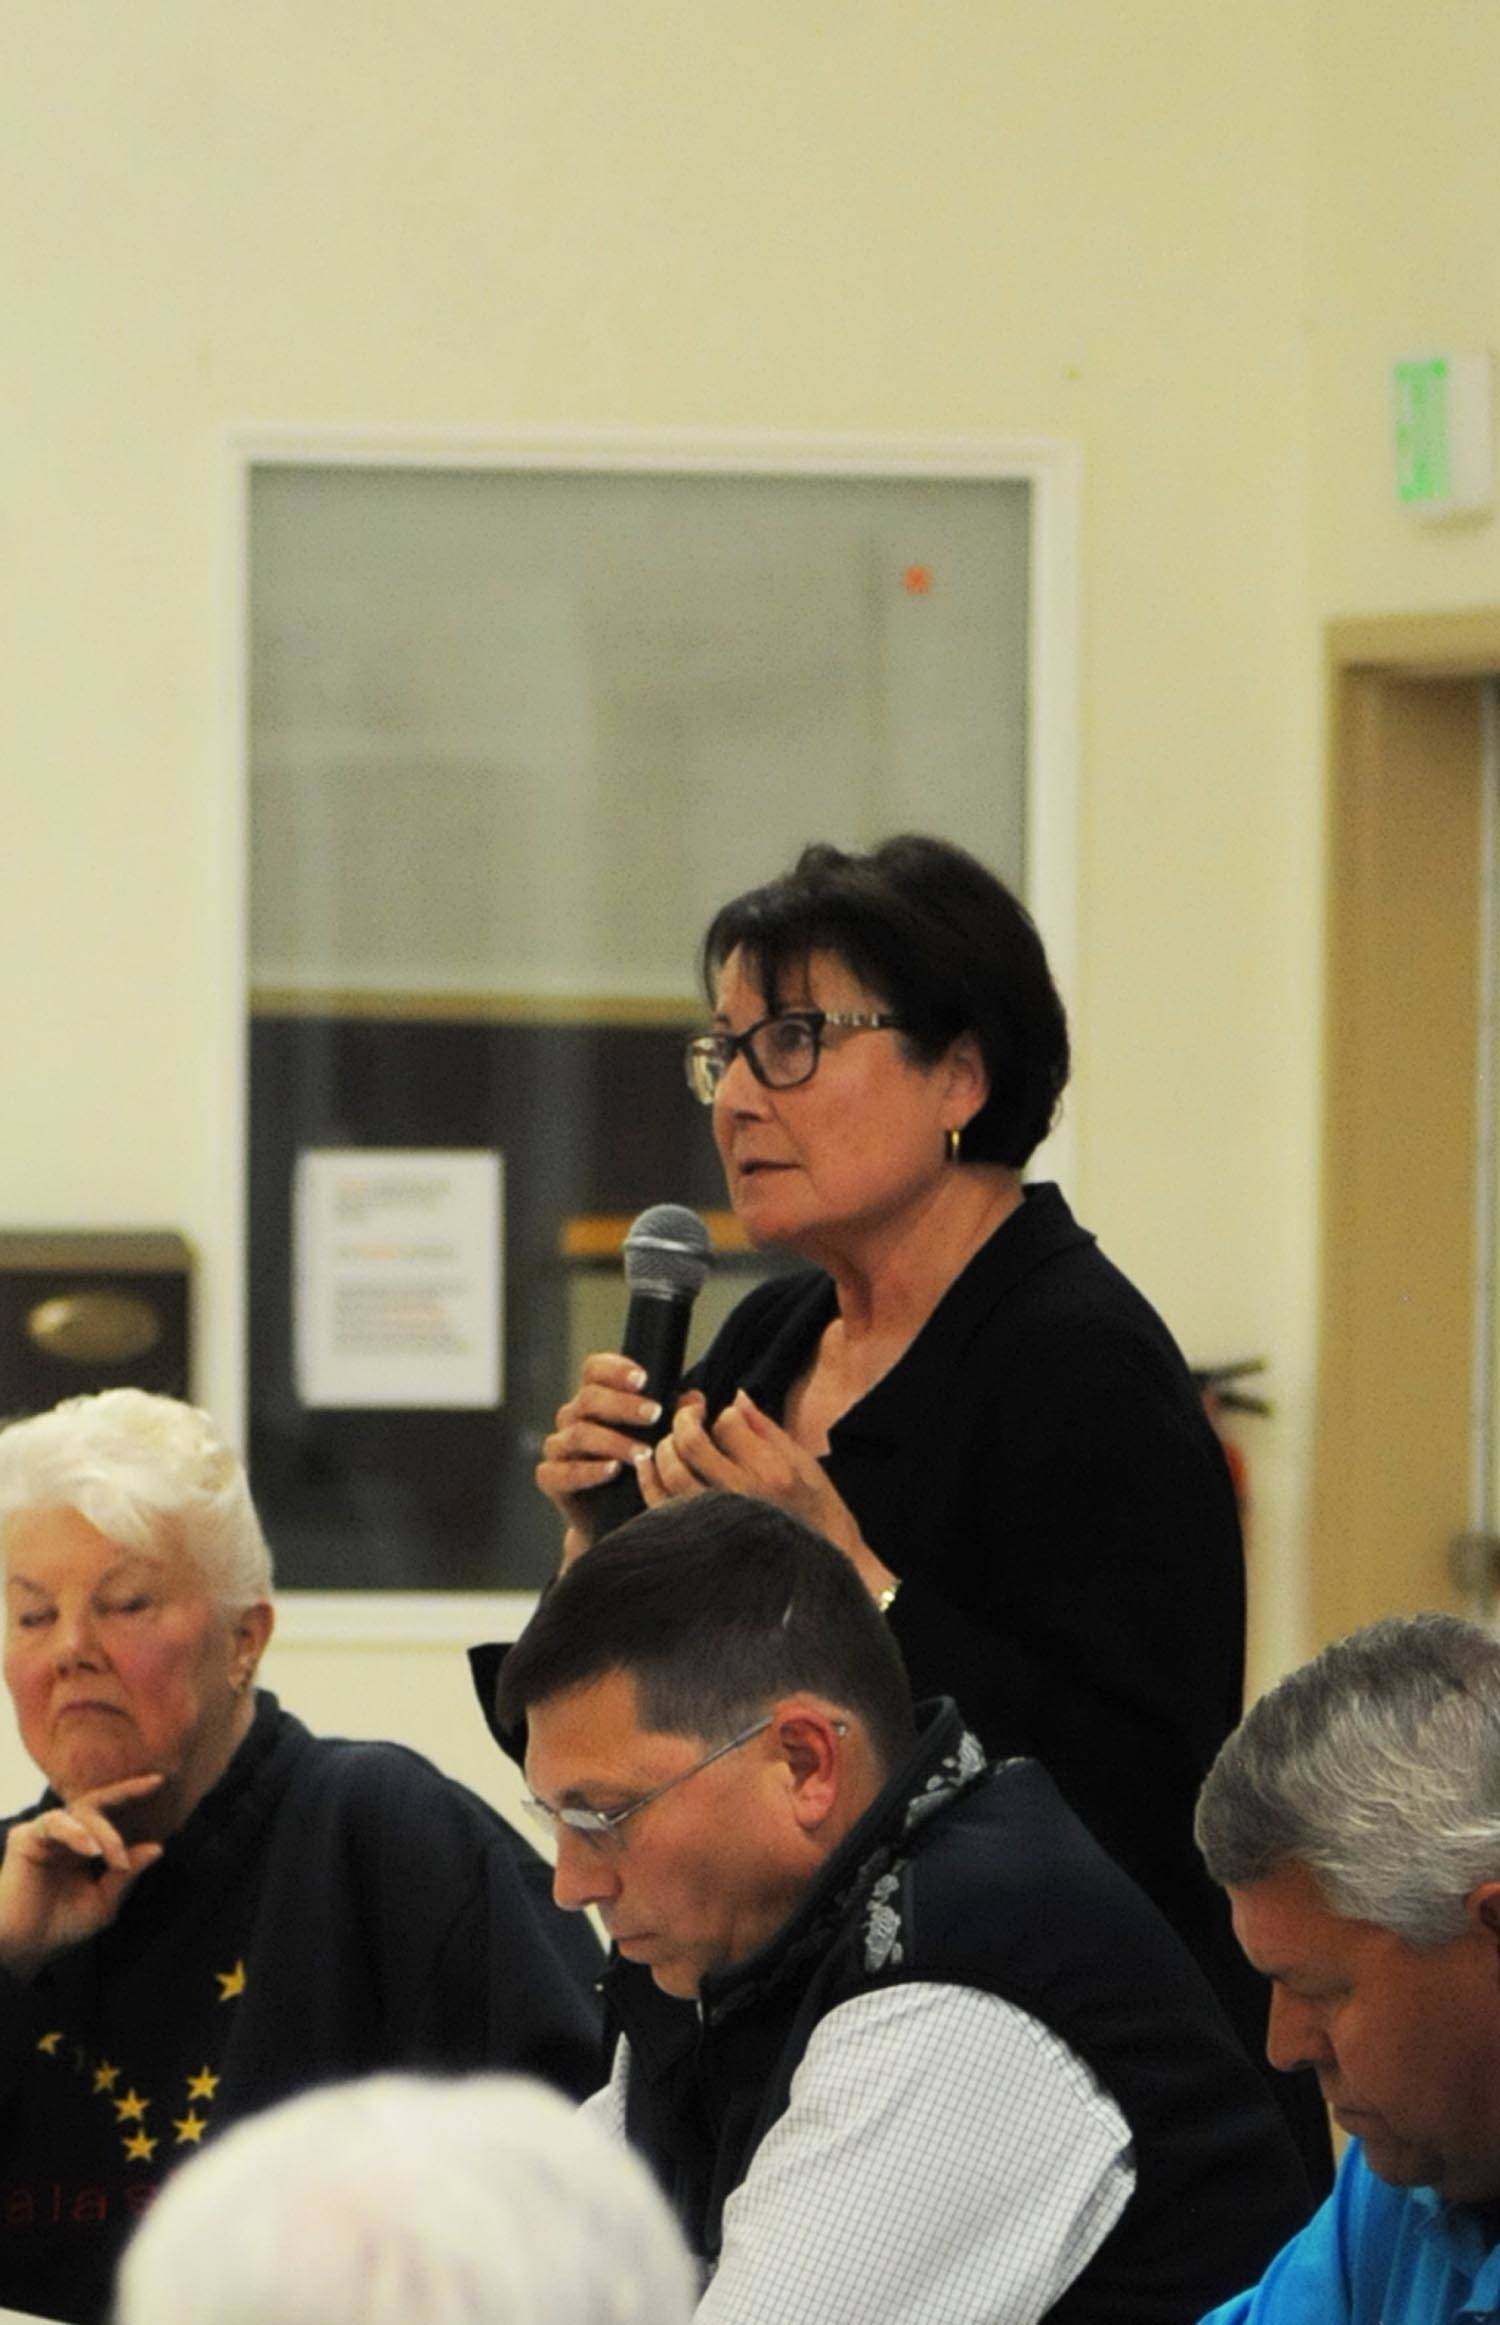 Linda Hutchings (standing), a candidate for Kenai Peninsula Borough mayor, answers a question during a forum with fellow candidates Dale Bagley (center) and Charlie Pierce (right) at the Funny River Community Center on Thursday, Aug. 16, 2017 in Funny River, Alaska. (Photo by Elizabeth Earl/Peninsula Clarion, file)